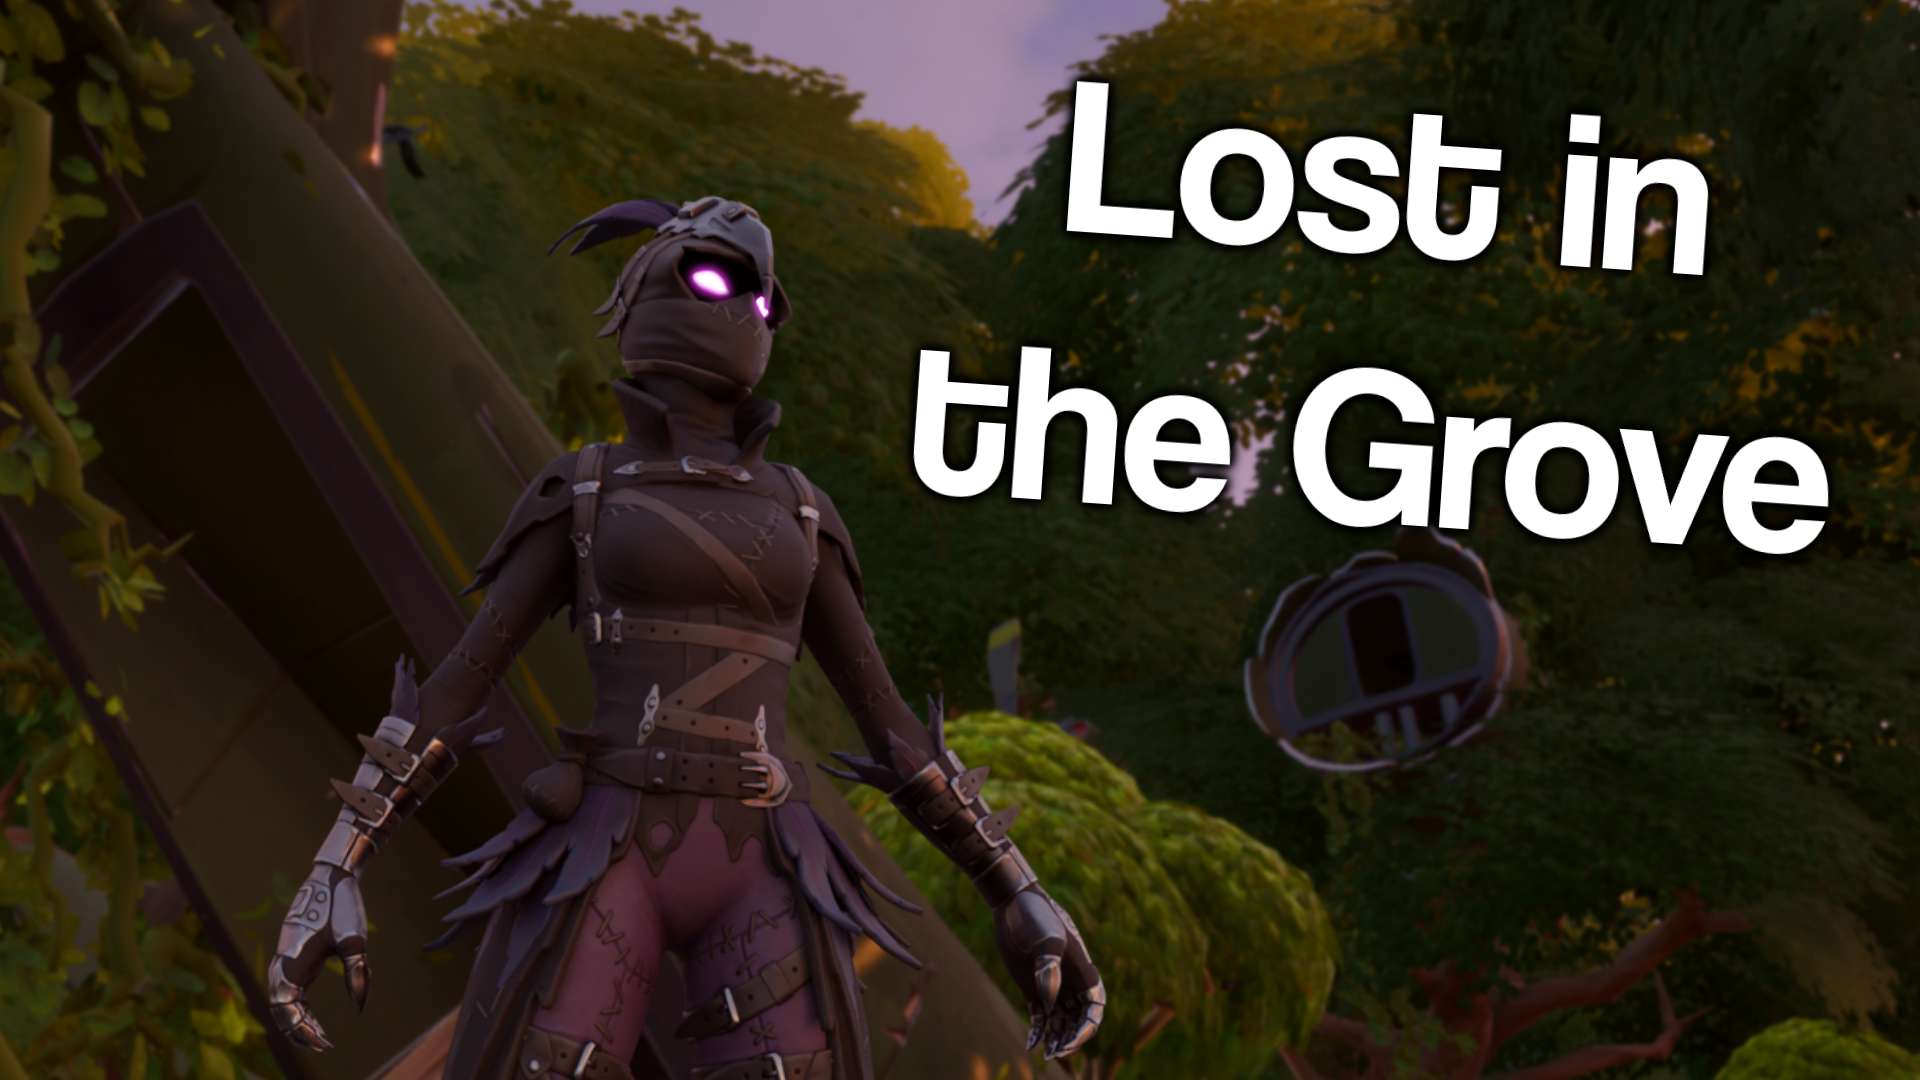 LOST IN THE GROVE